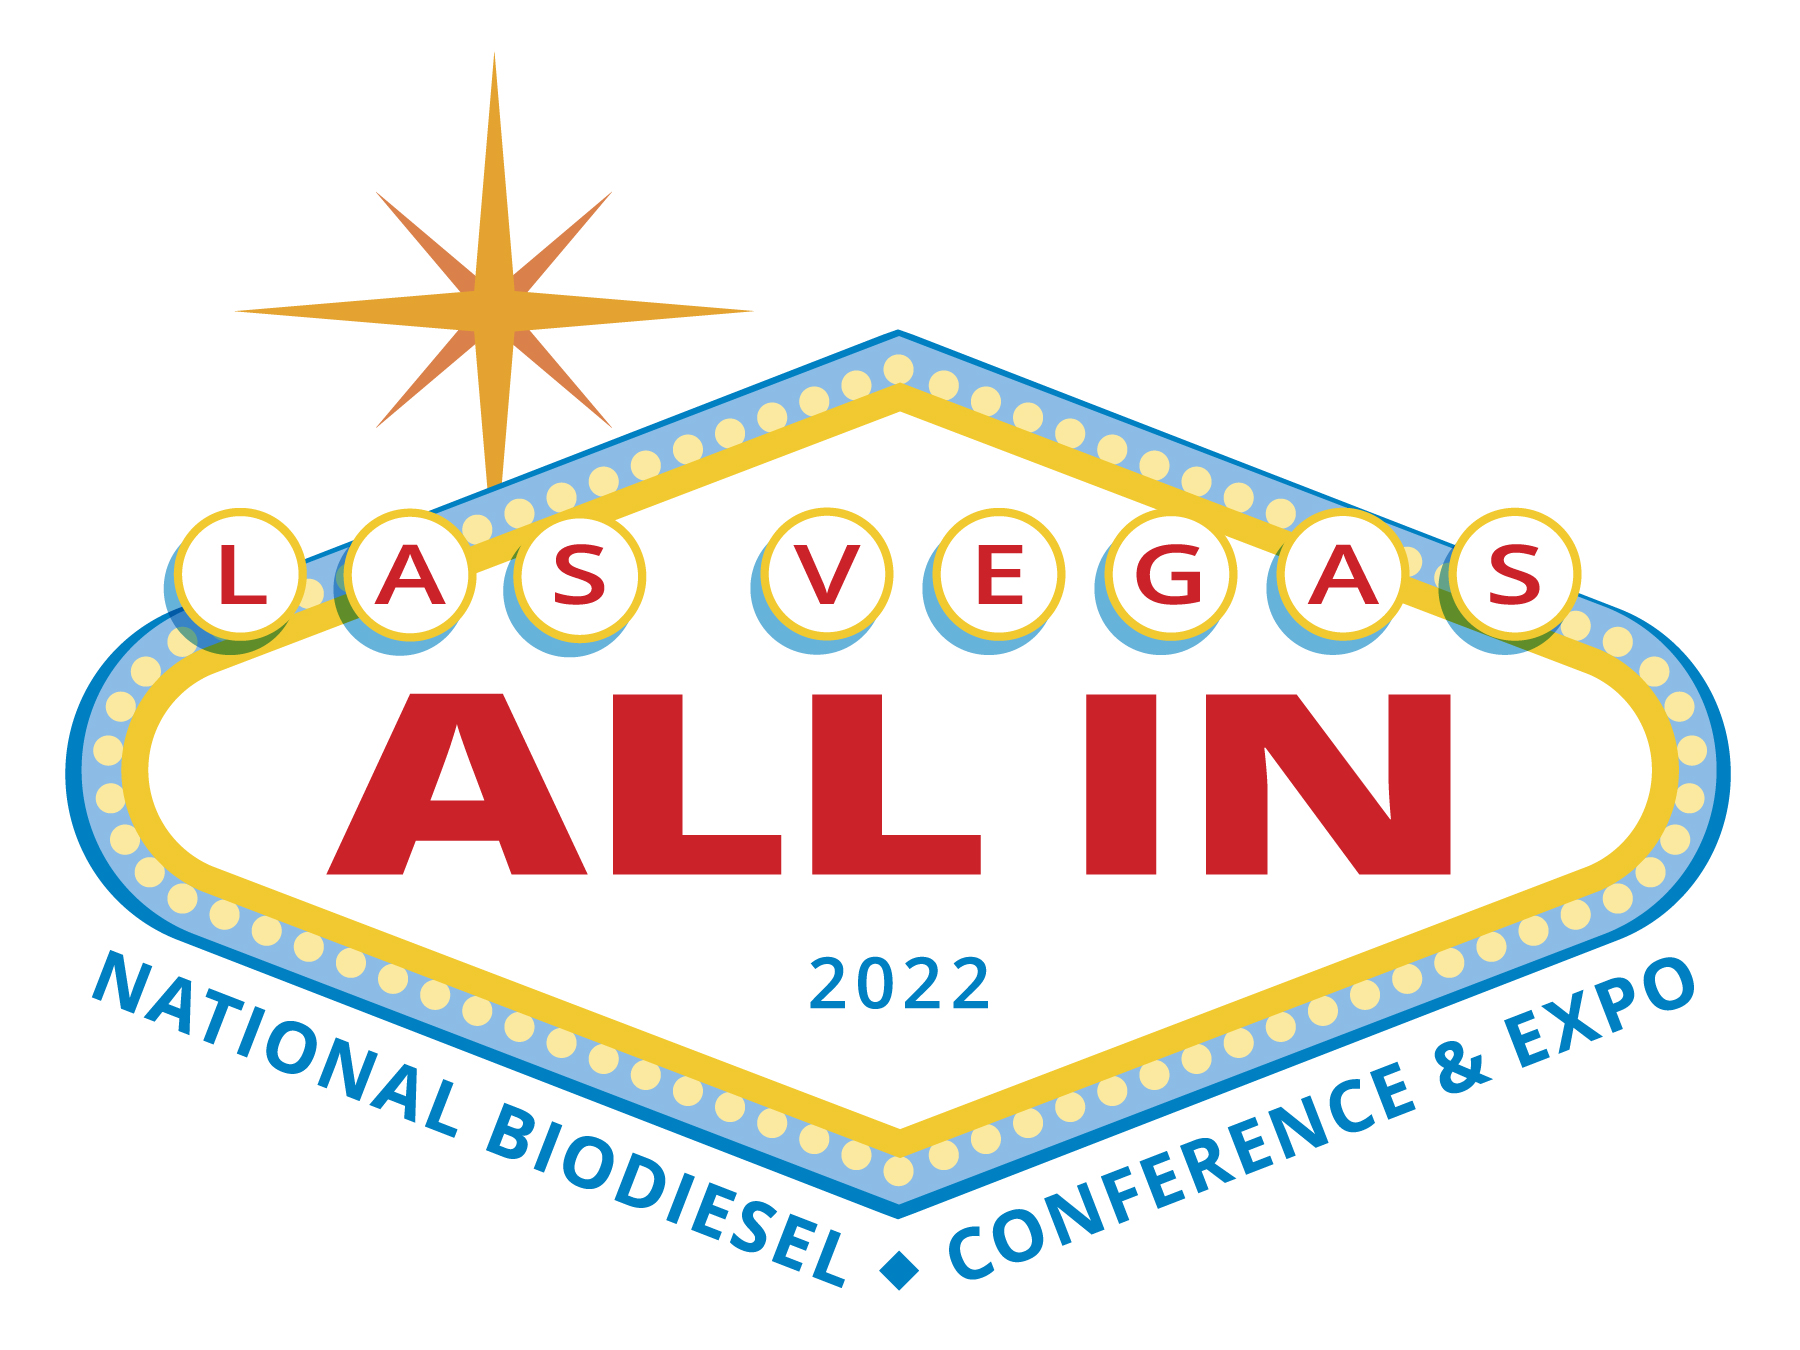 National Biodiesel Conference 2022